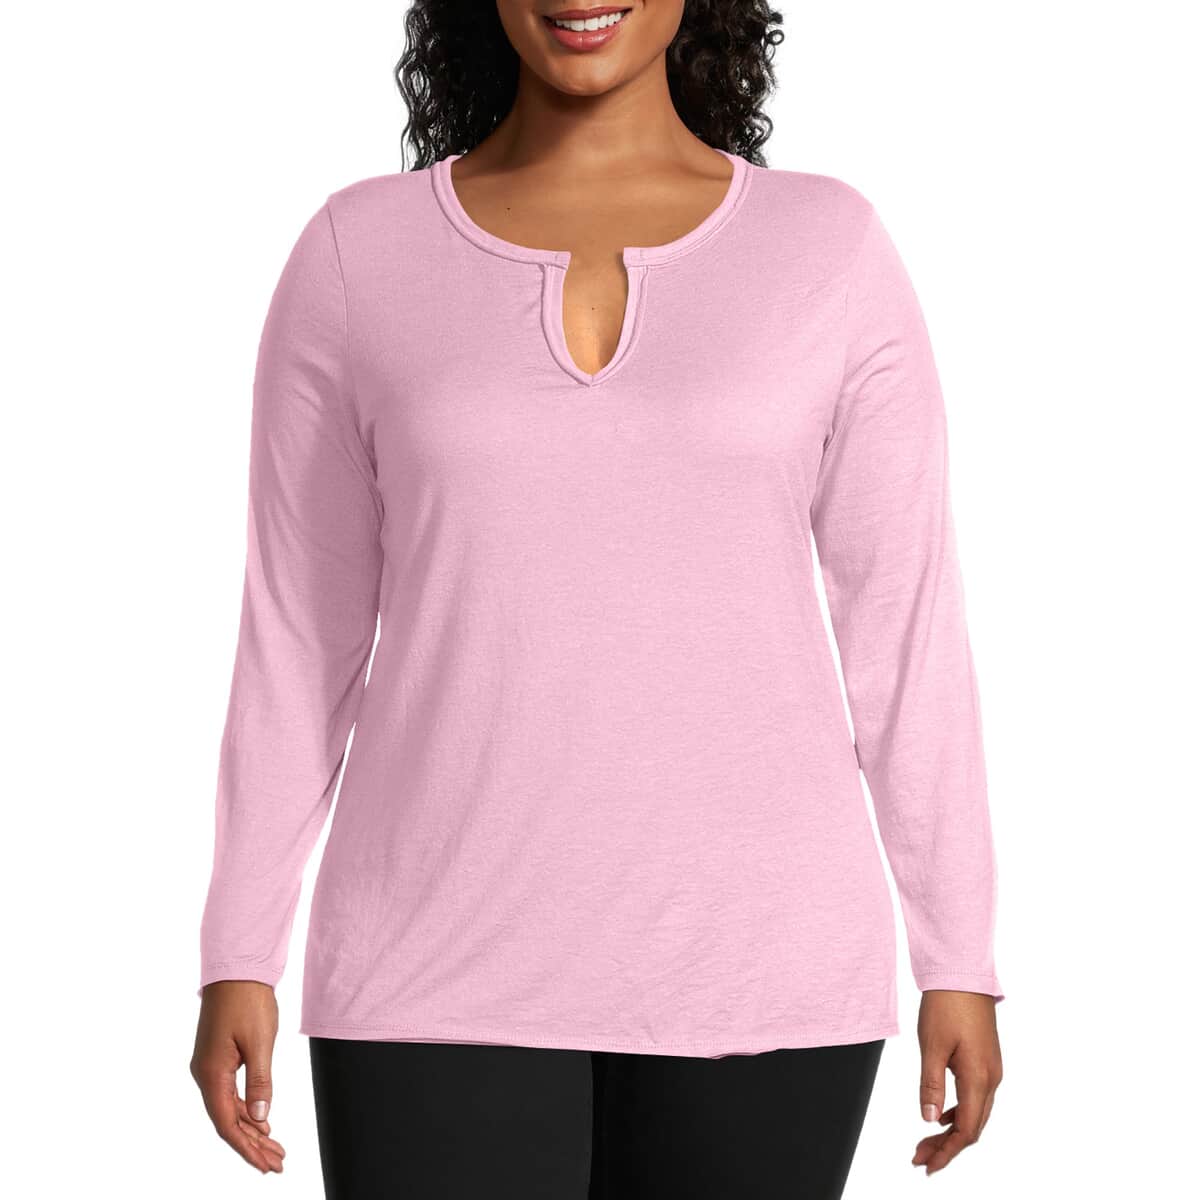 Closeout TLV 3 Pack - Hanes Just My Size Long Sleeve T-Shirts - Fuchsia, Teal, Light Pink (2X) image number 3